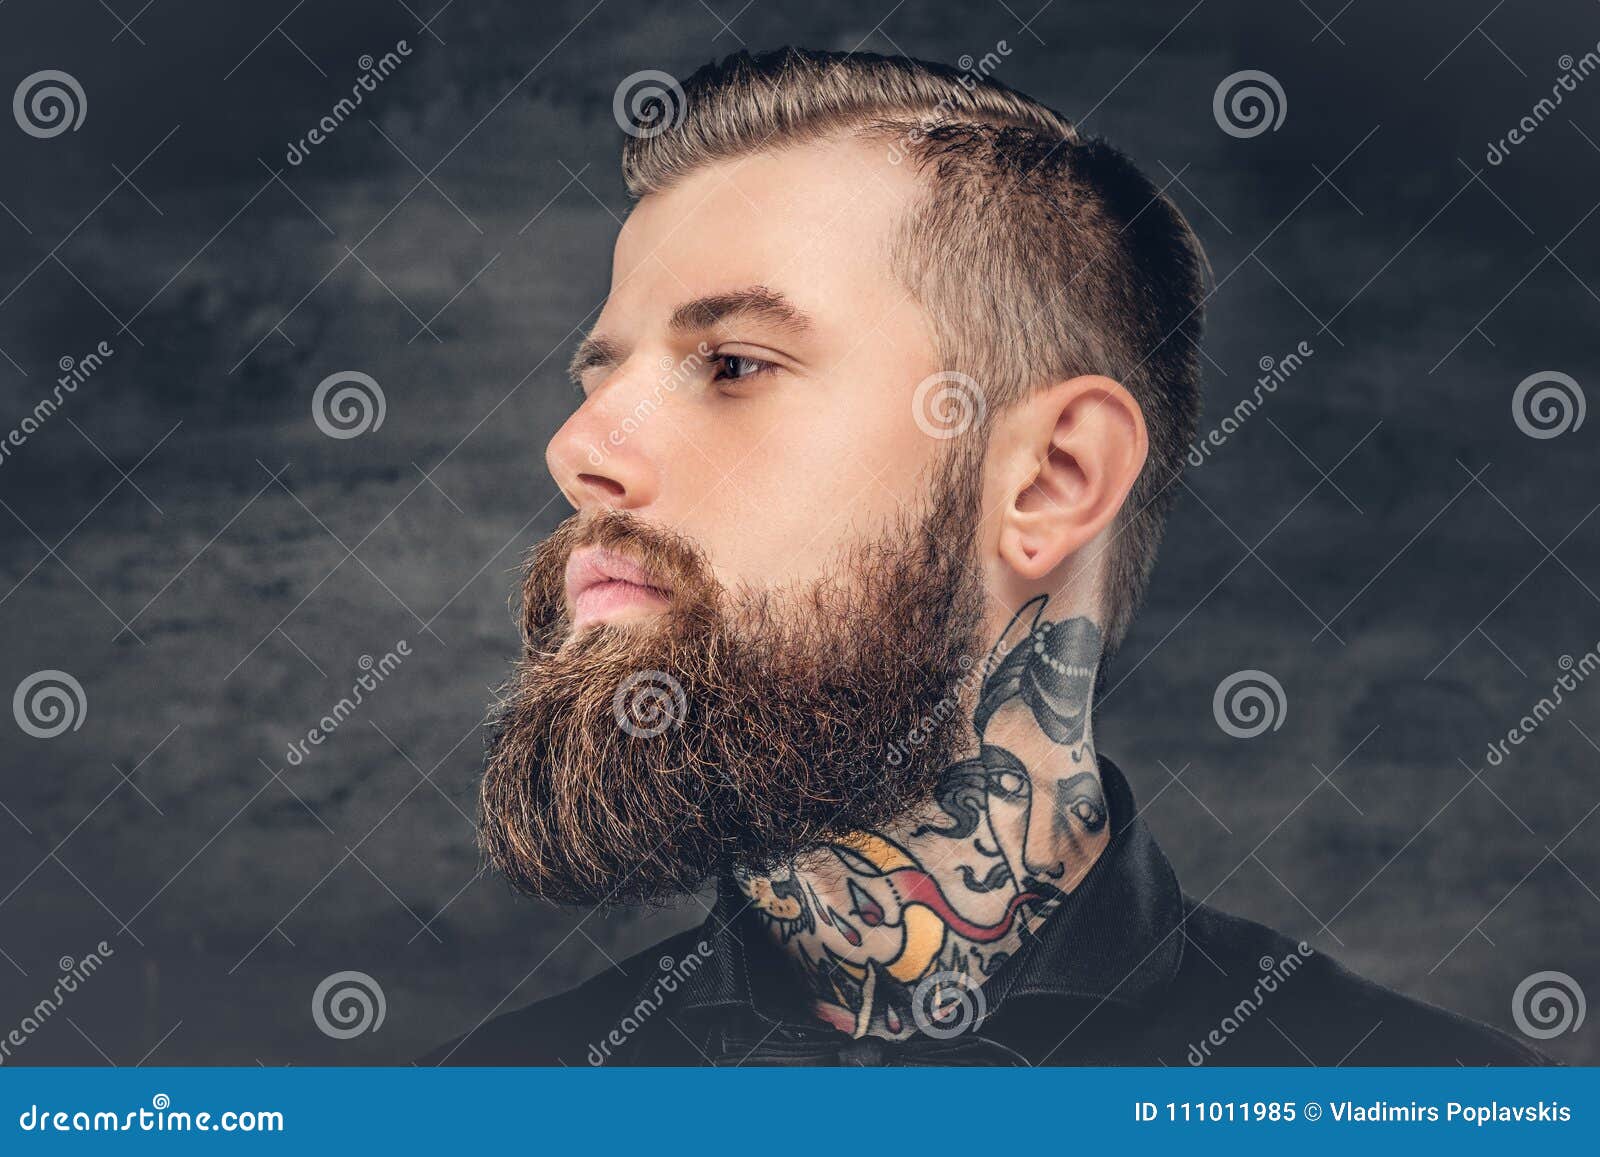 Bearded Male with Tattoo on His Neck. Stock Image - Image of hair, adult:  111011985